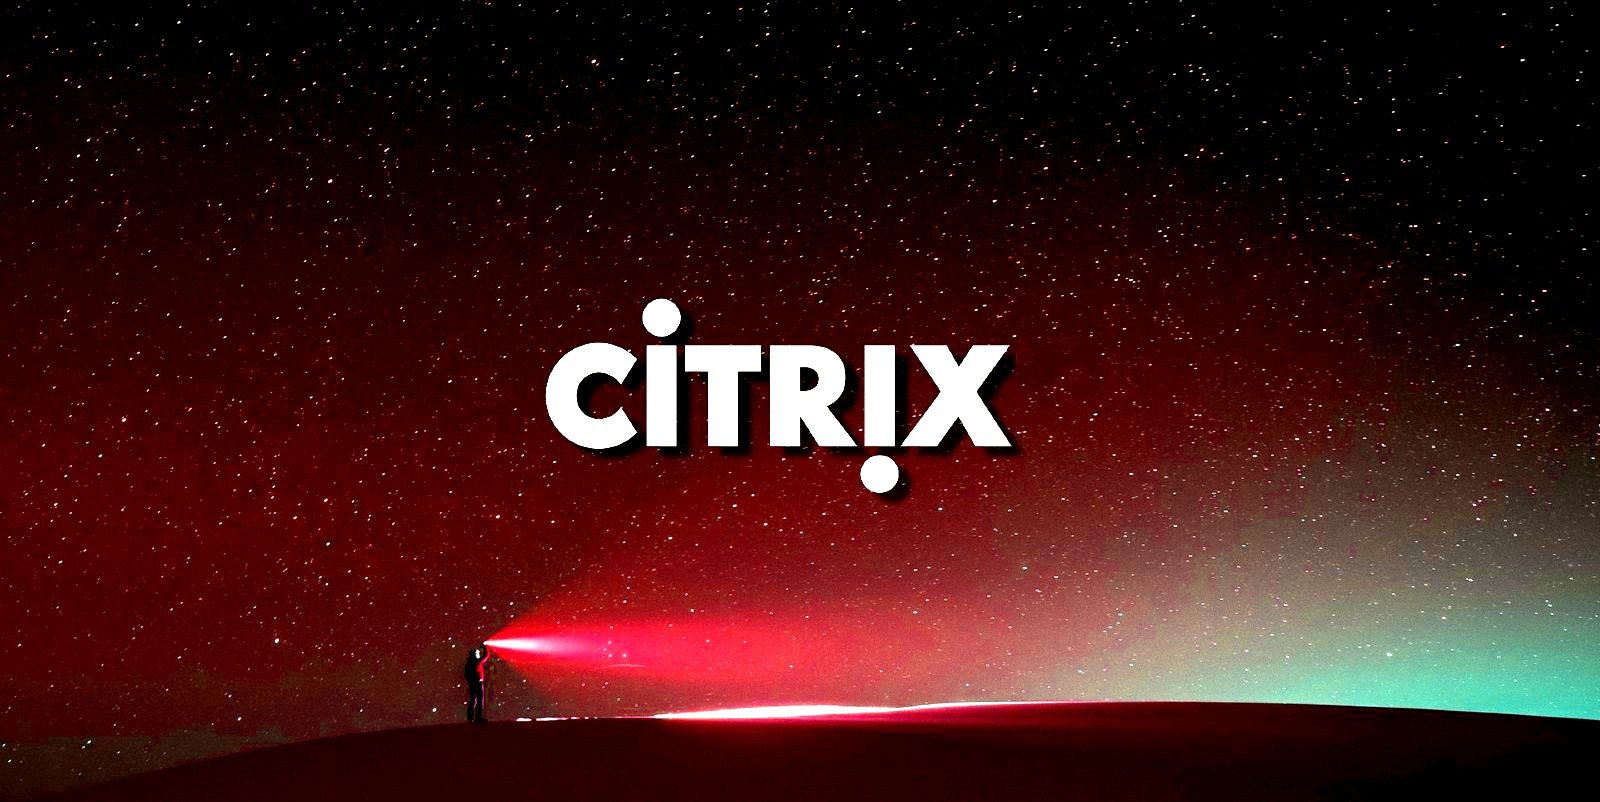 Shadowserver reported that +15K Citrix servers are likely vulnerable to attacks exploiting the flaw CVE-2023-3519